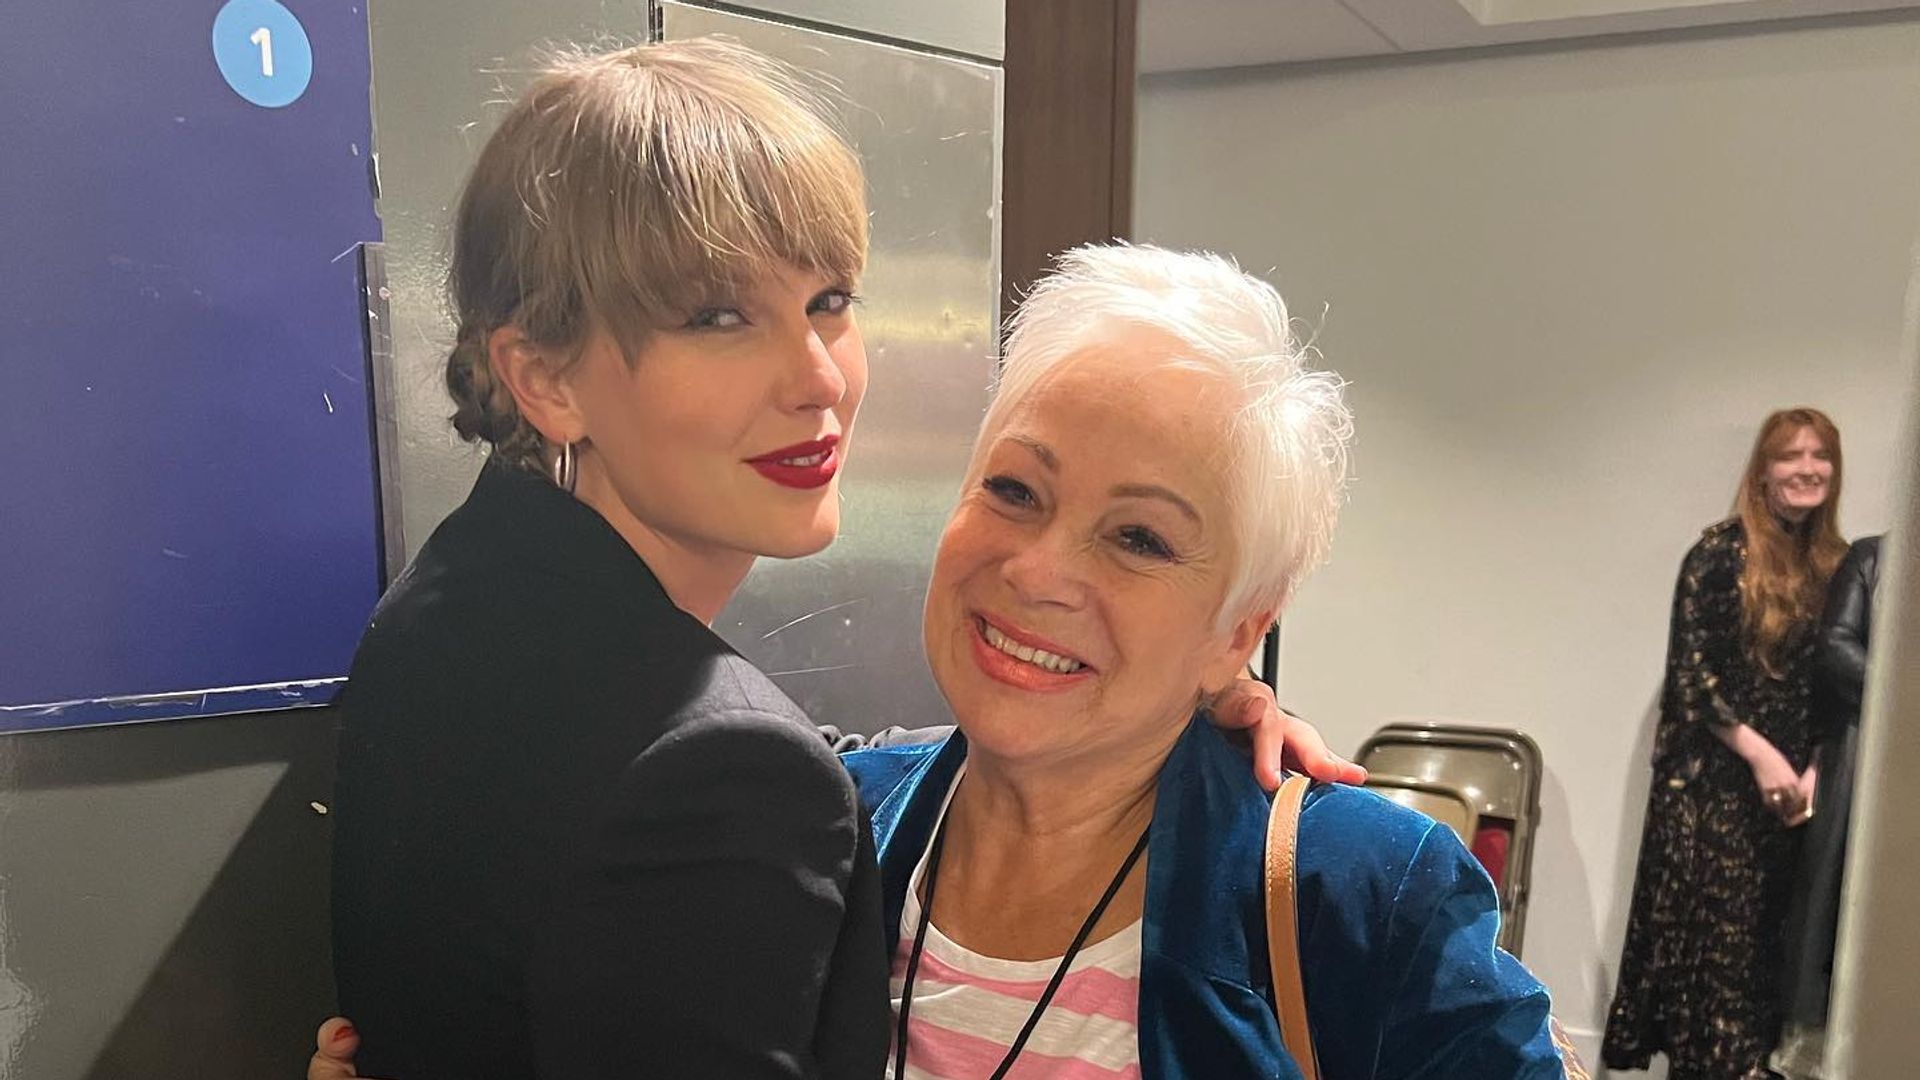 Matty Healy's mom breaks silence on Taylor Swift's songs about her son 